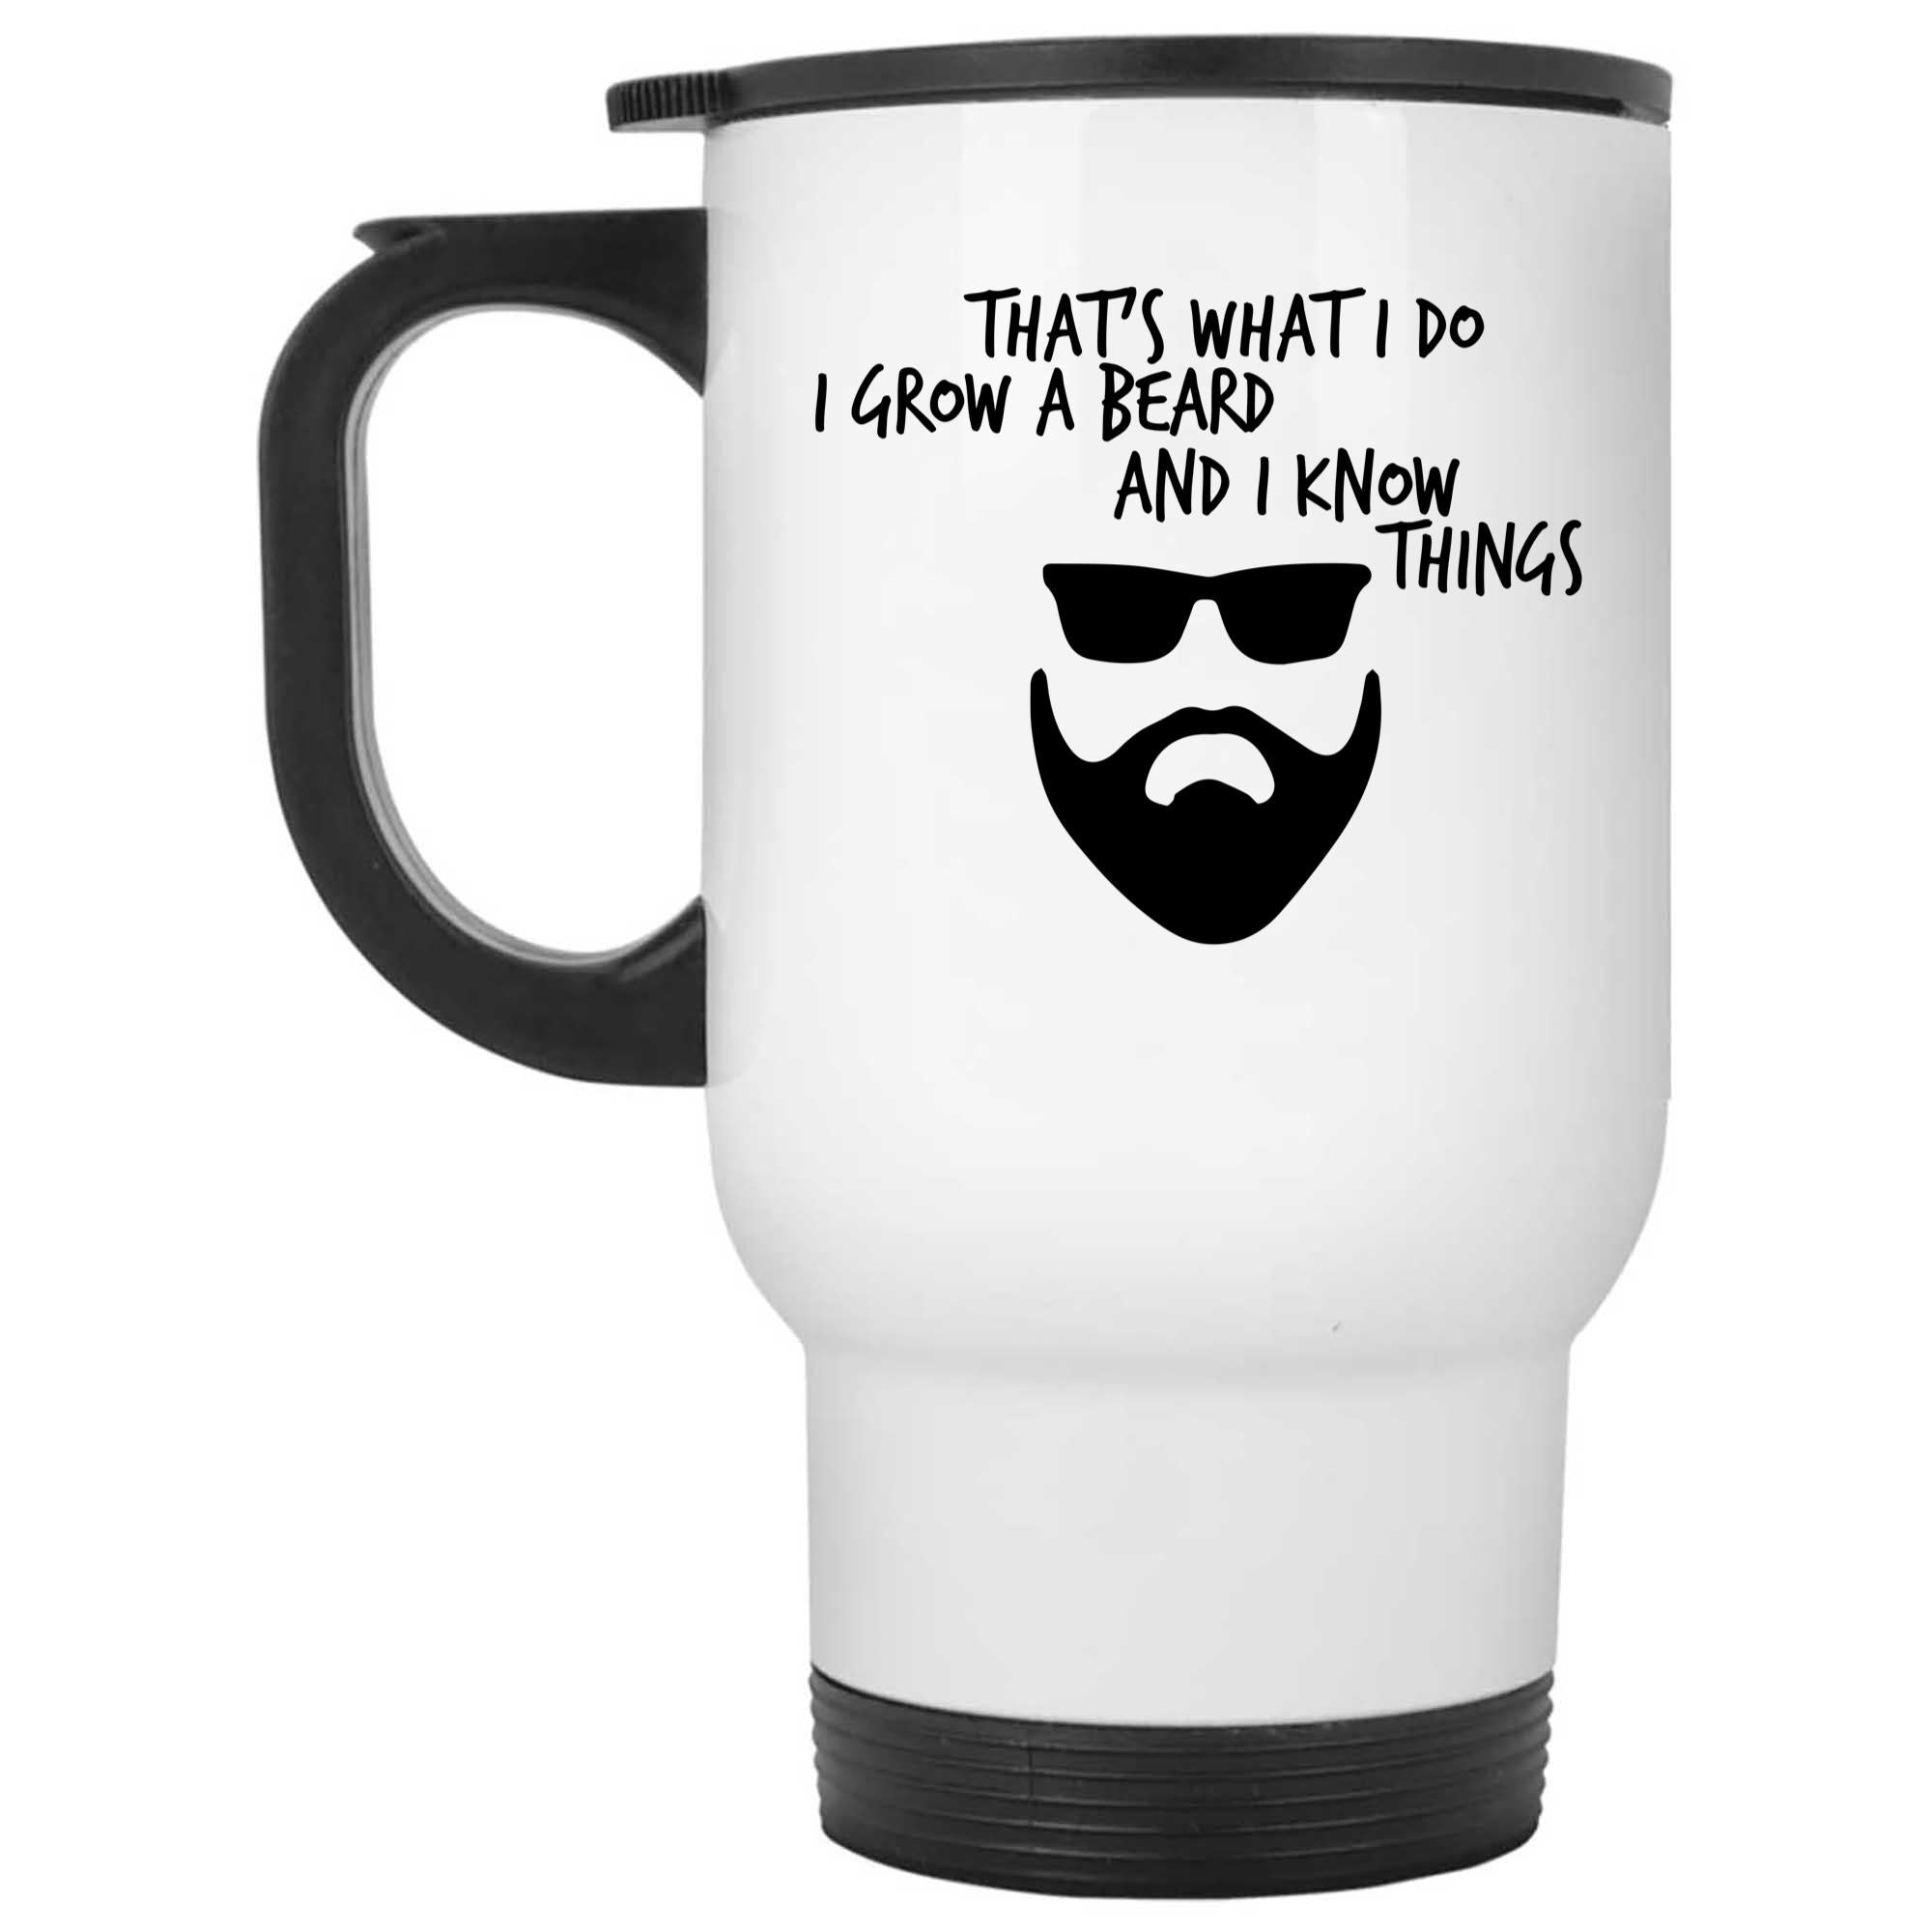 Skitongifts Funny Ceramic Novelty Coffee Mug That's What I Do I Grow A Beard And I Know Things For Grandpa Husband Dad Brother iZGOzWv